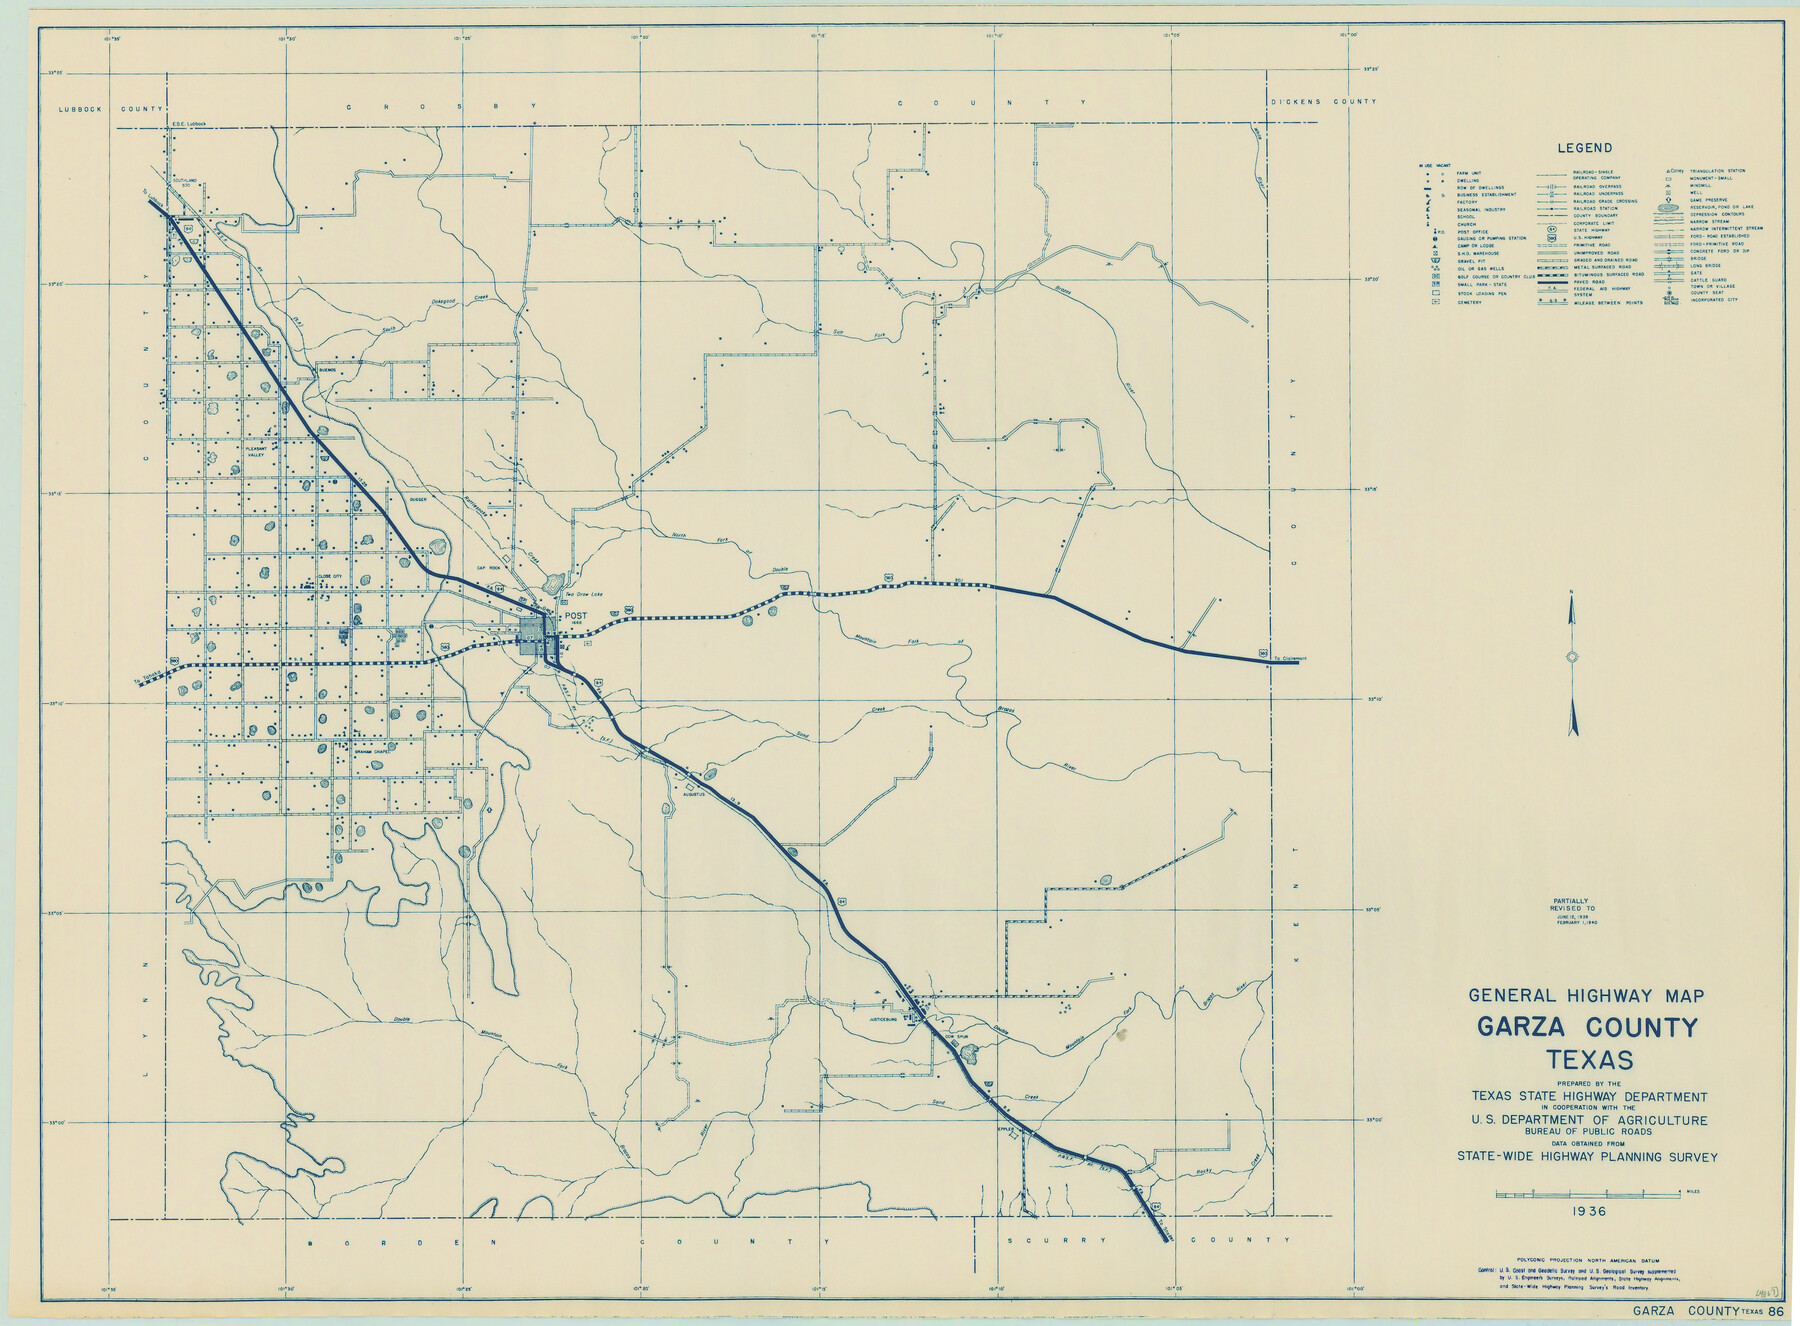 79098, General Highway Map, Garza County, Texas, Texas State Library and Archives